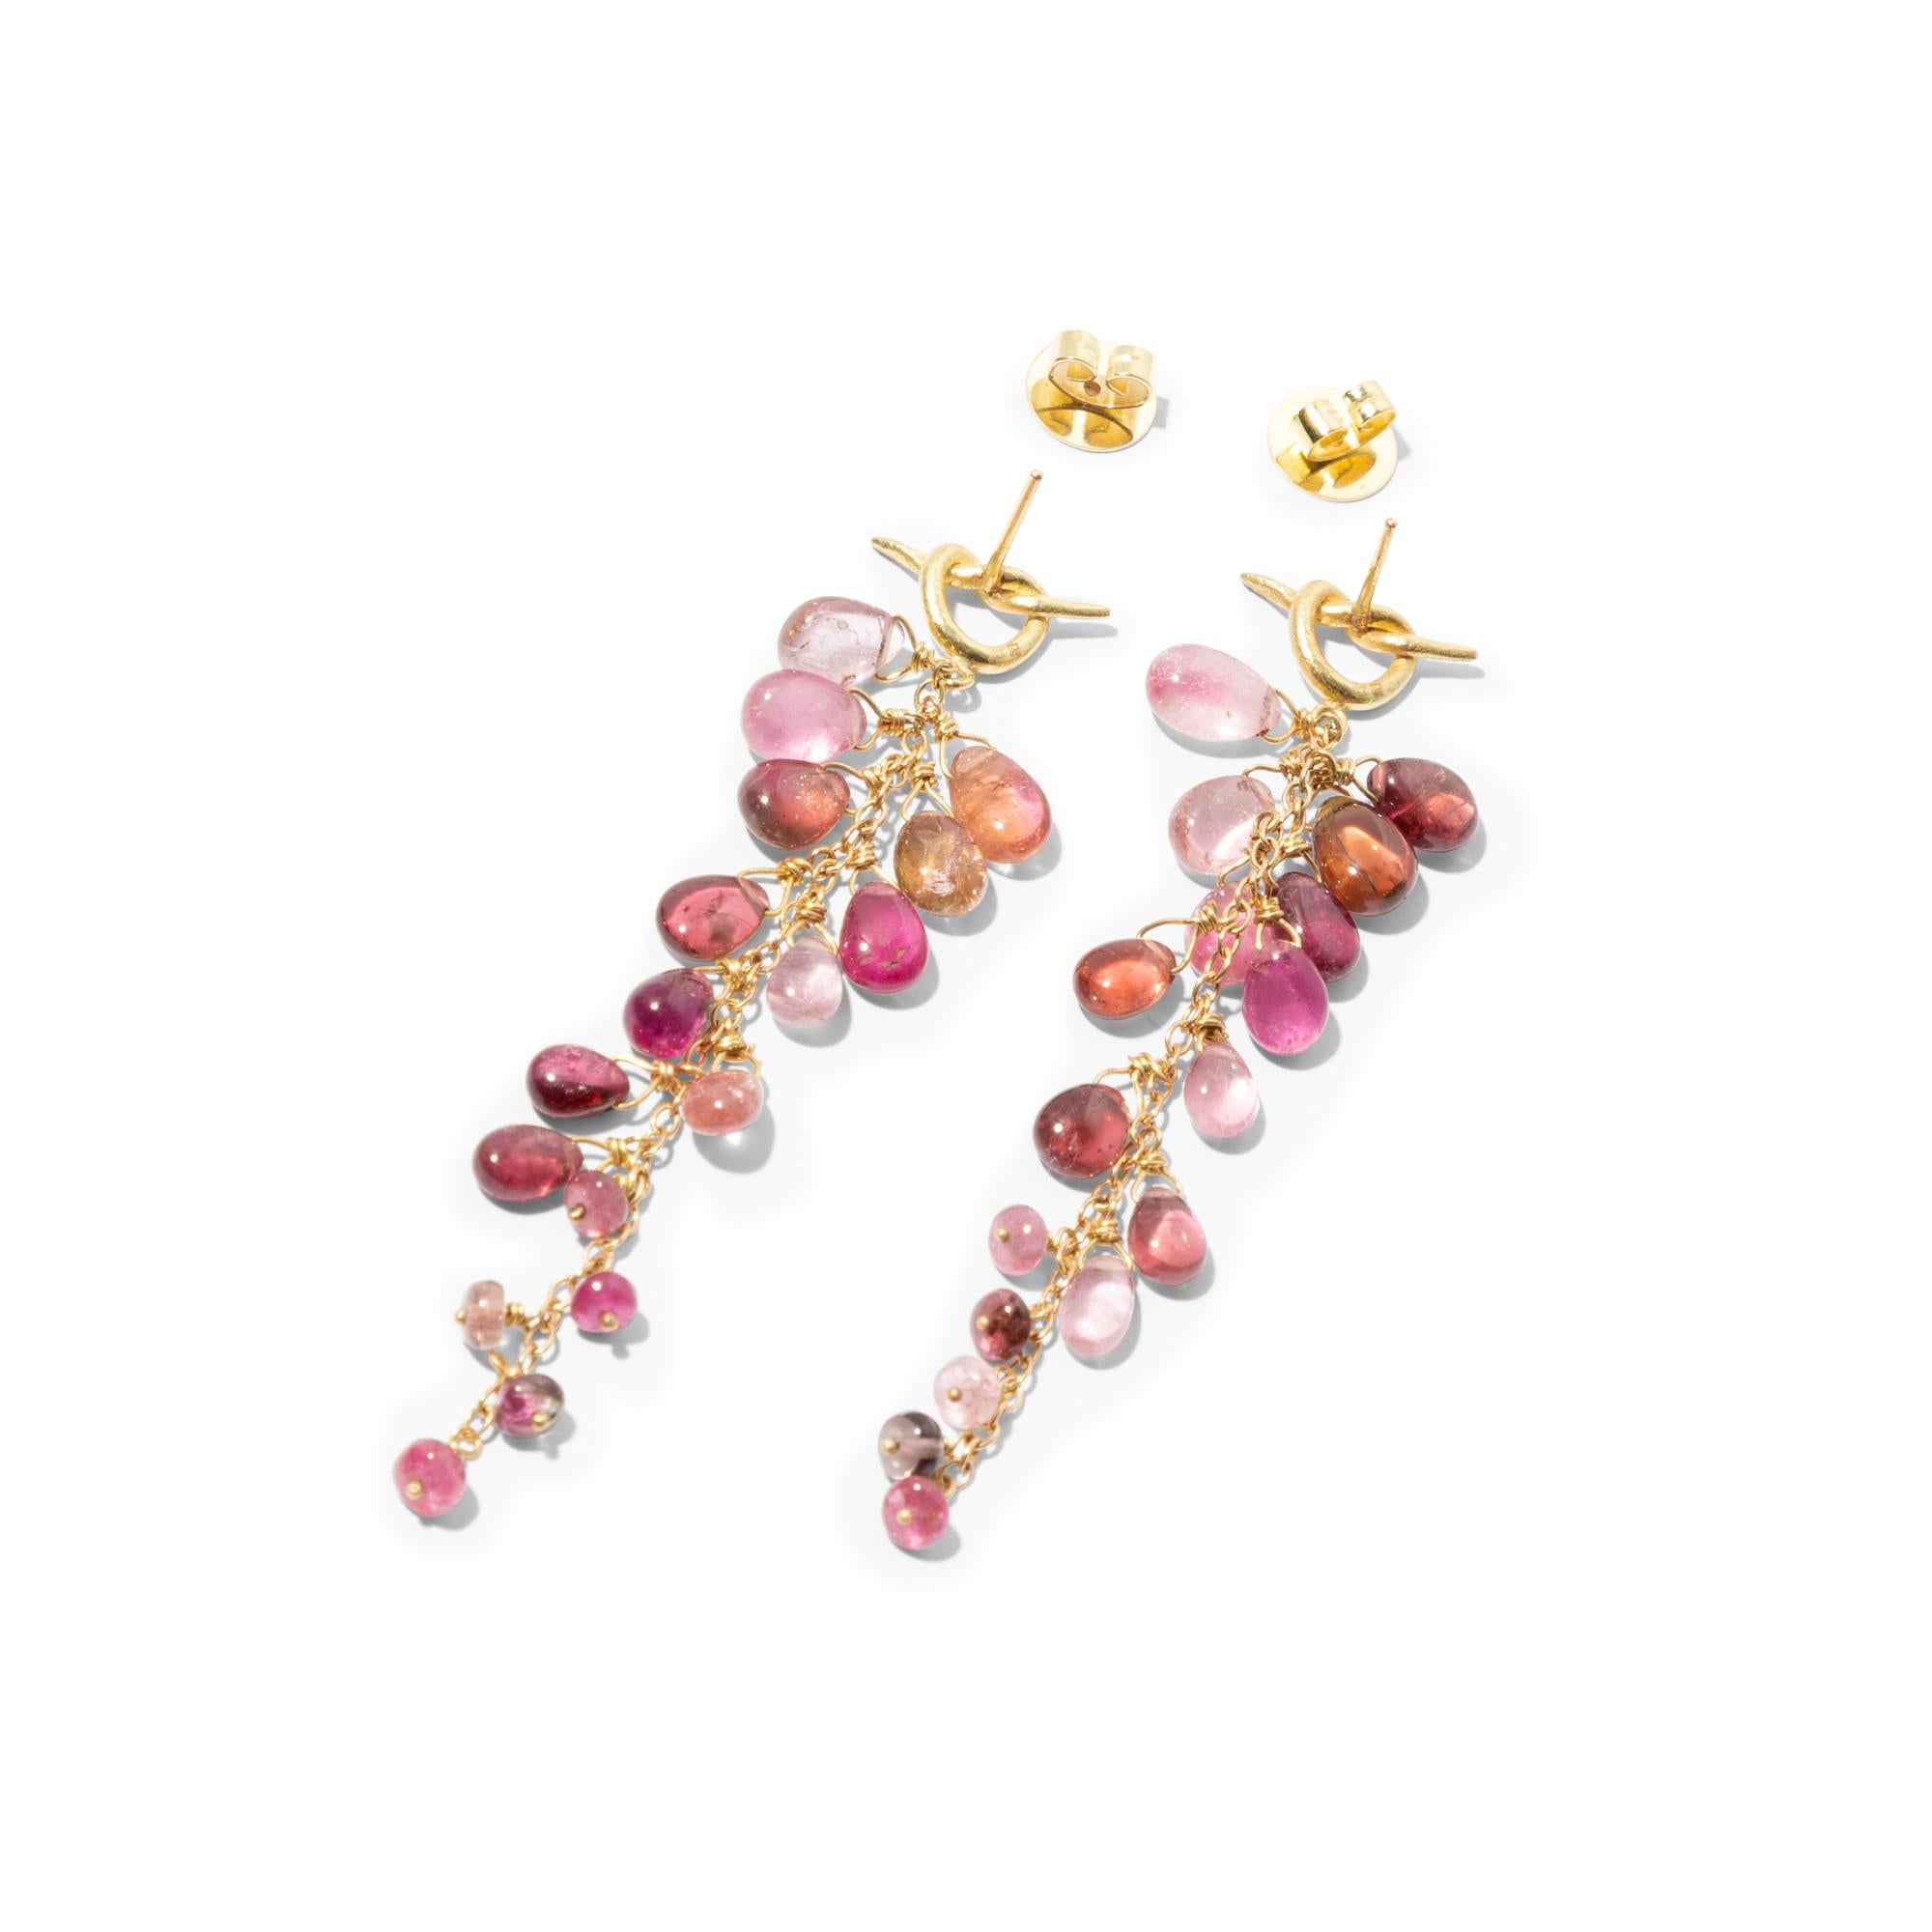 Gorgeous pair of 18k gold drop earrings with sumptuous, crystal clear pink tourmaline beads cascading down like a bunch of pink grapes creating lots of movement. 
A quirky 